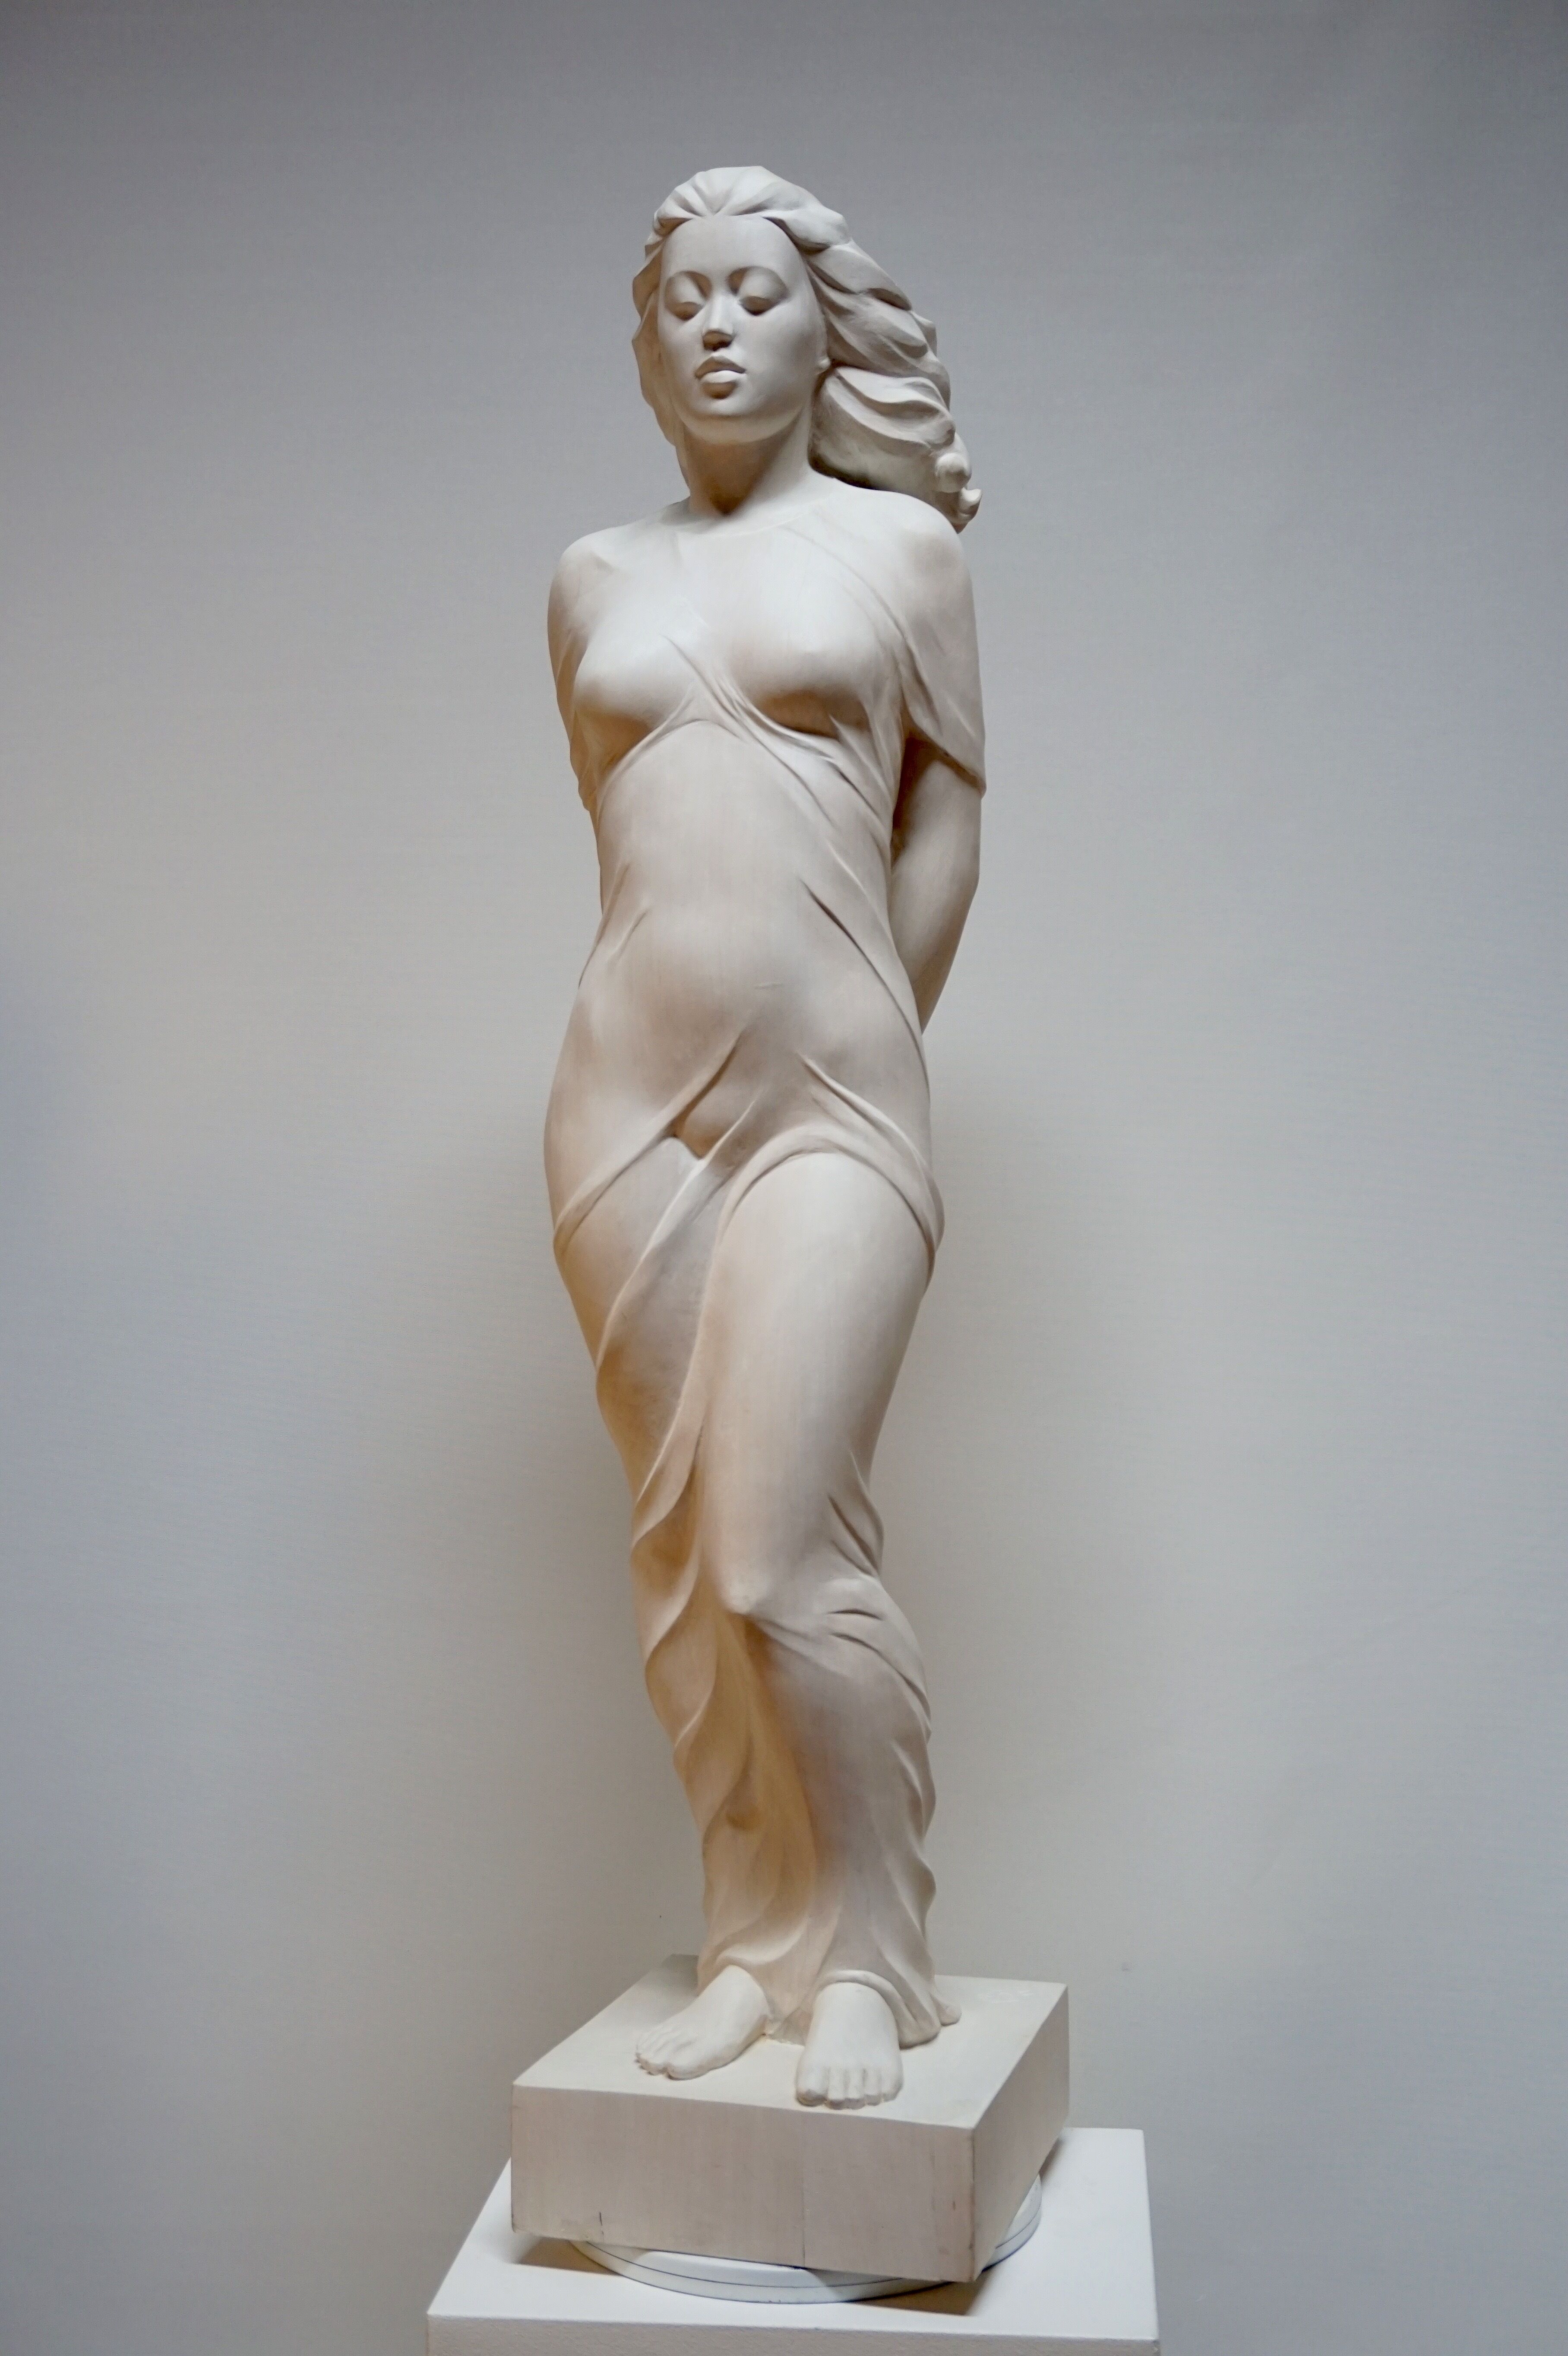 Sculpture "Lonely" (2011)